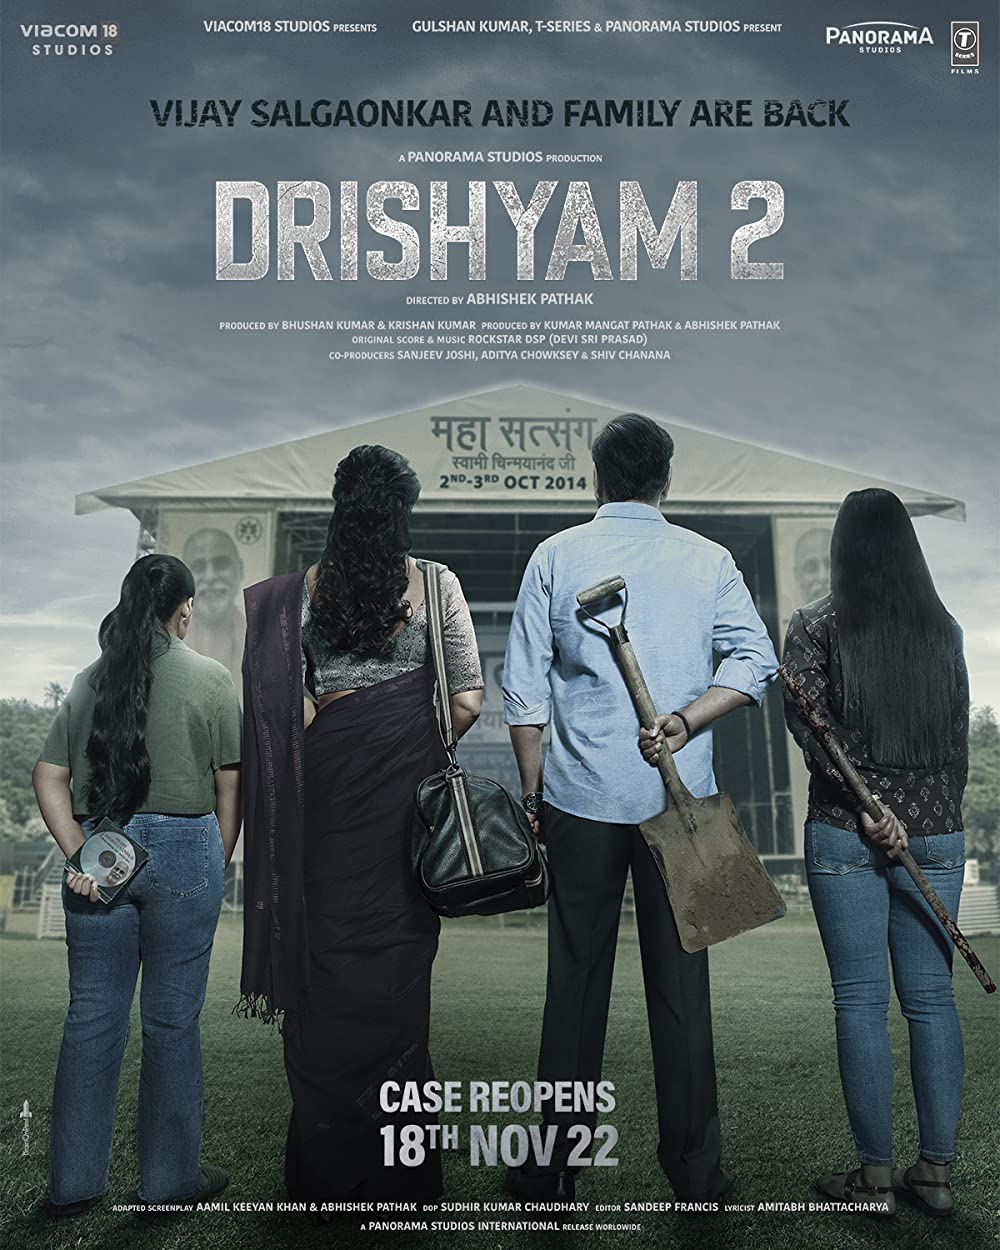 According to the latest box office numbers from Cirque du Soleil, Ajay Devgn's Drishyam 2 continues to gain momentum well into its seventh week, while Ranveer Singh's film continues to flop